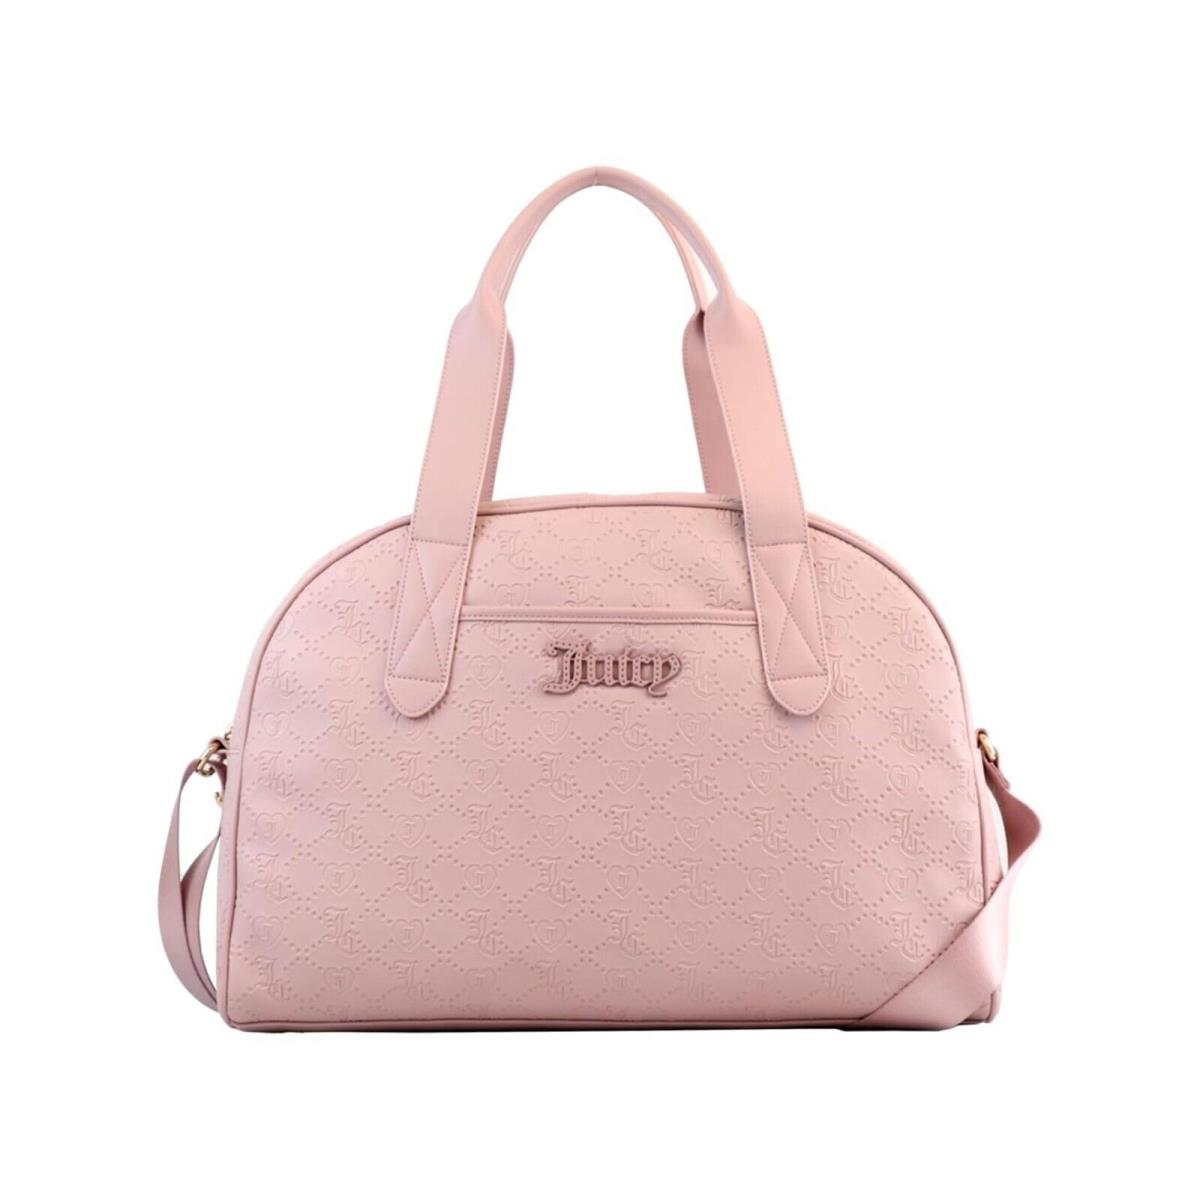 Juicy Couture Semi Charmed Weekender Duffle Bag Dusty Blush Pink - Handle/Strap: , Hardware: Gold, Exterior: